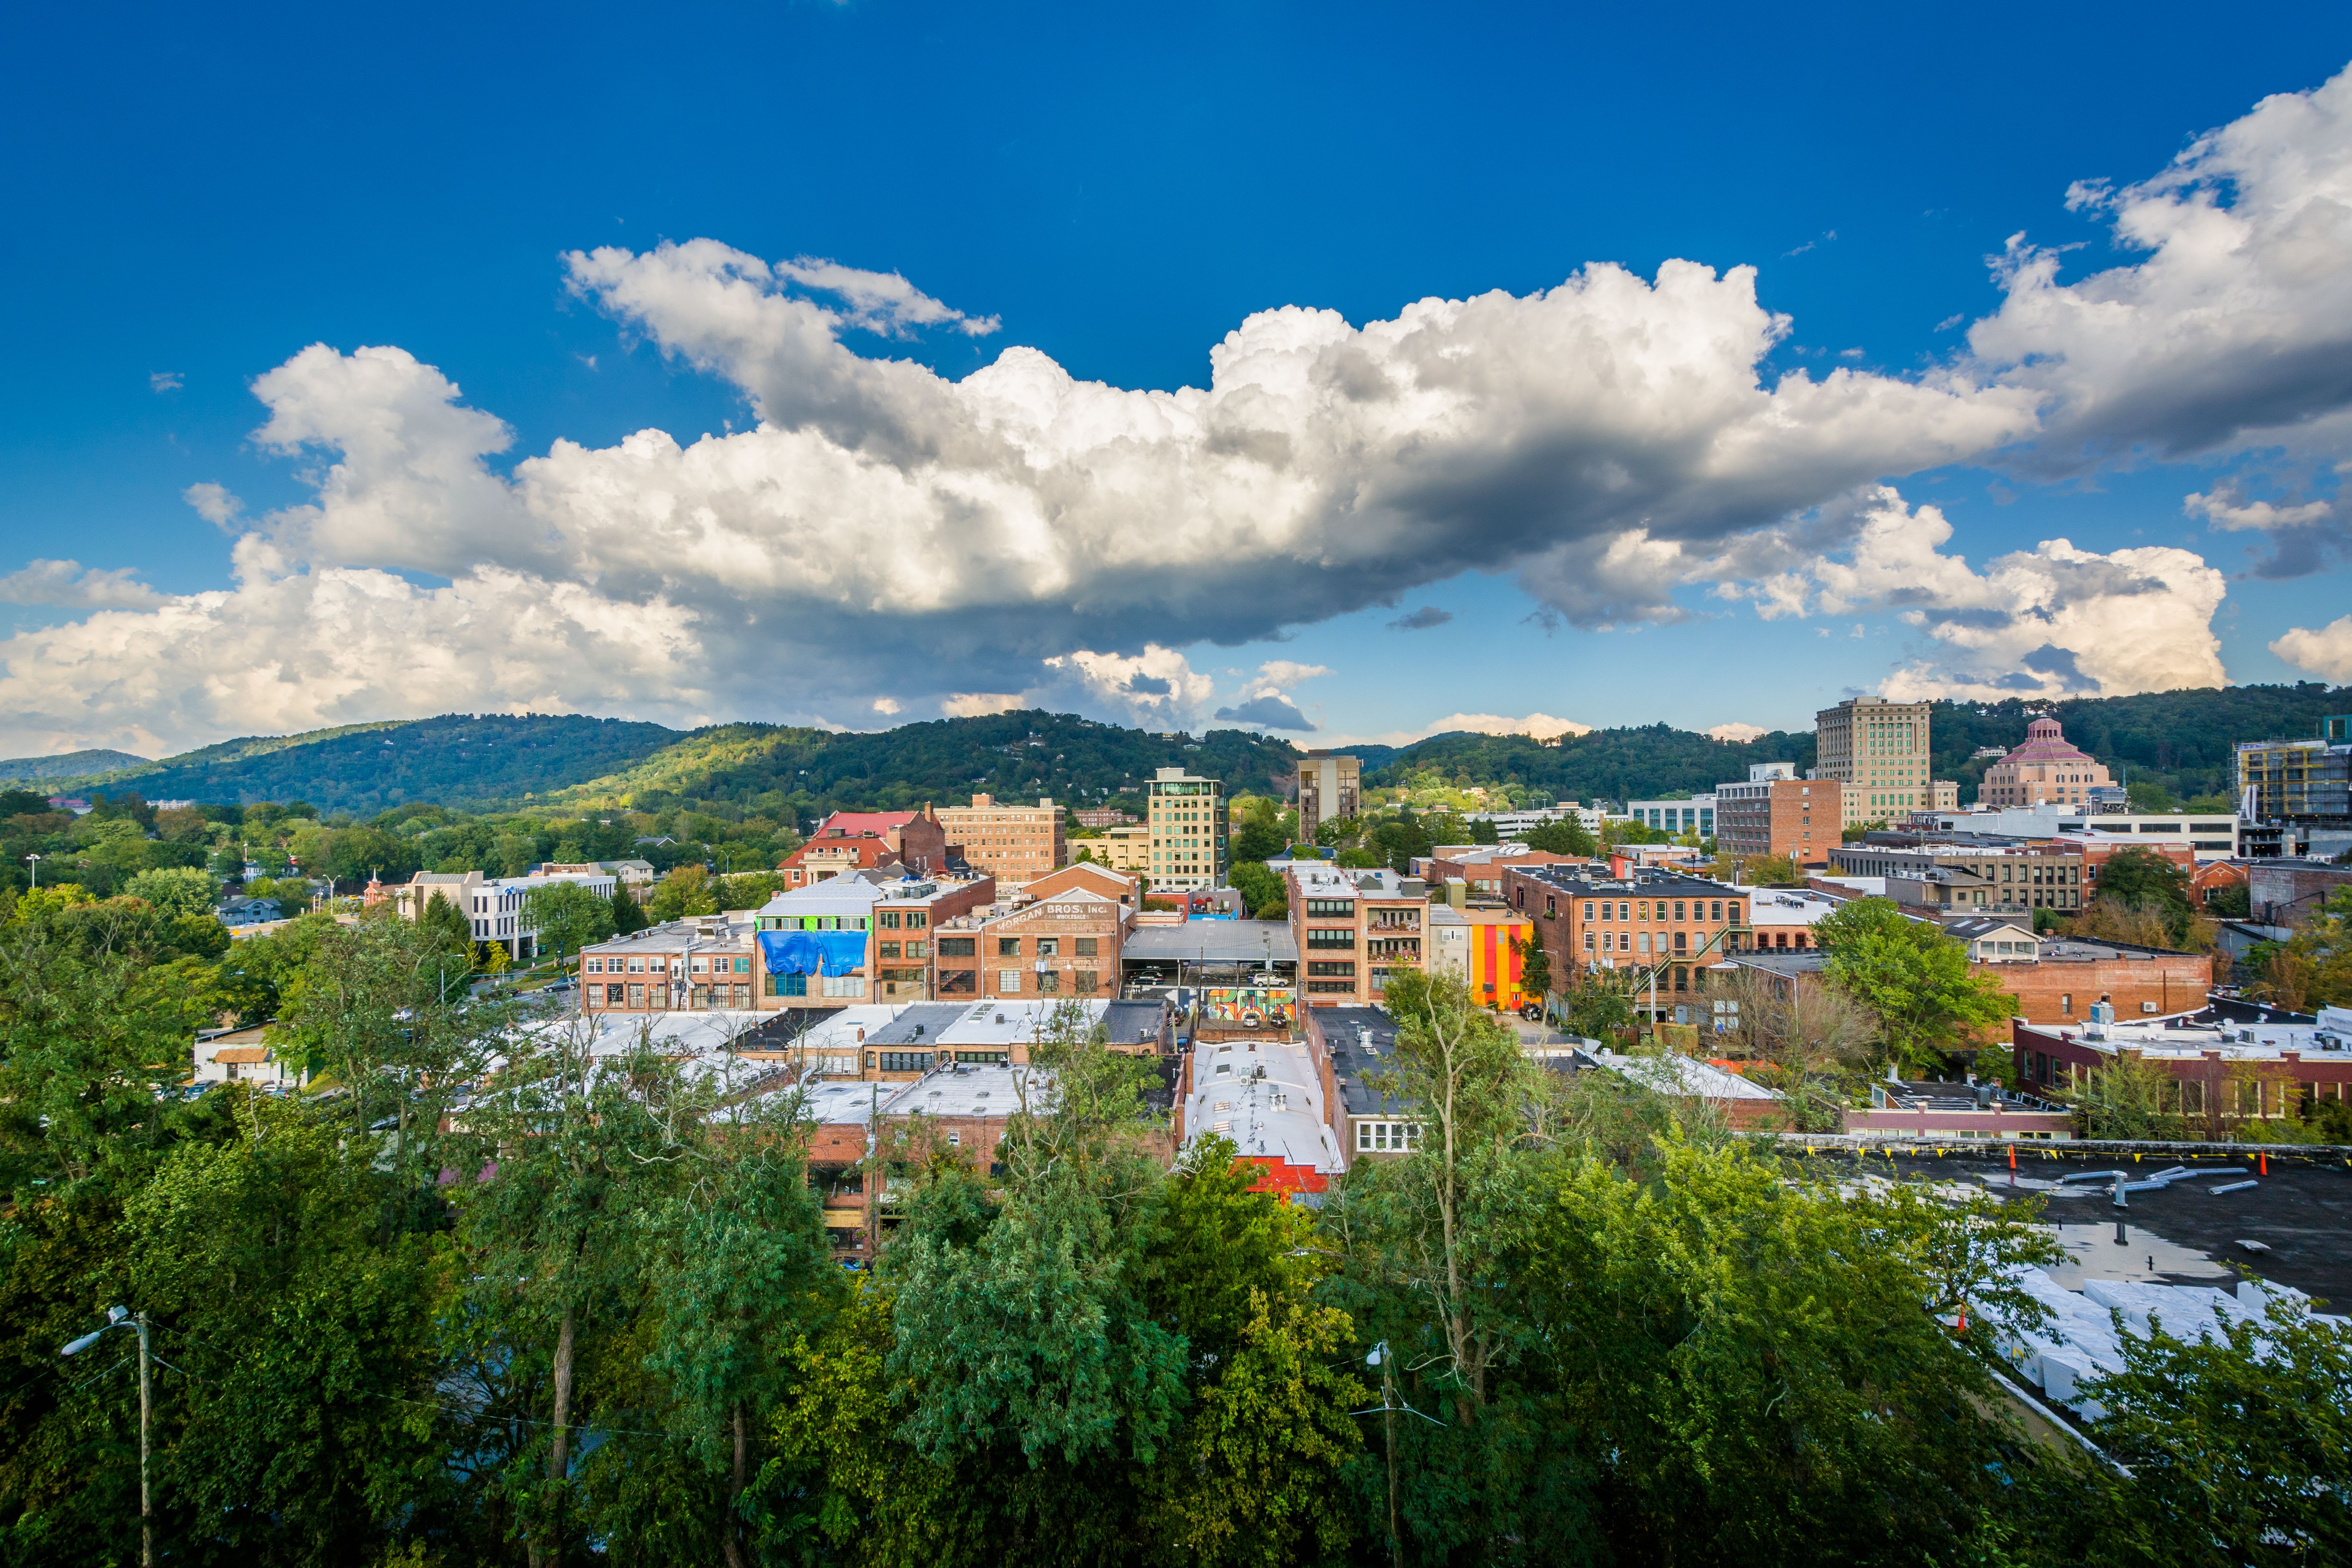 Downtown Asheville with buildings and surrounding mountains